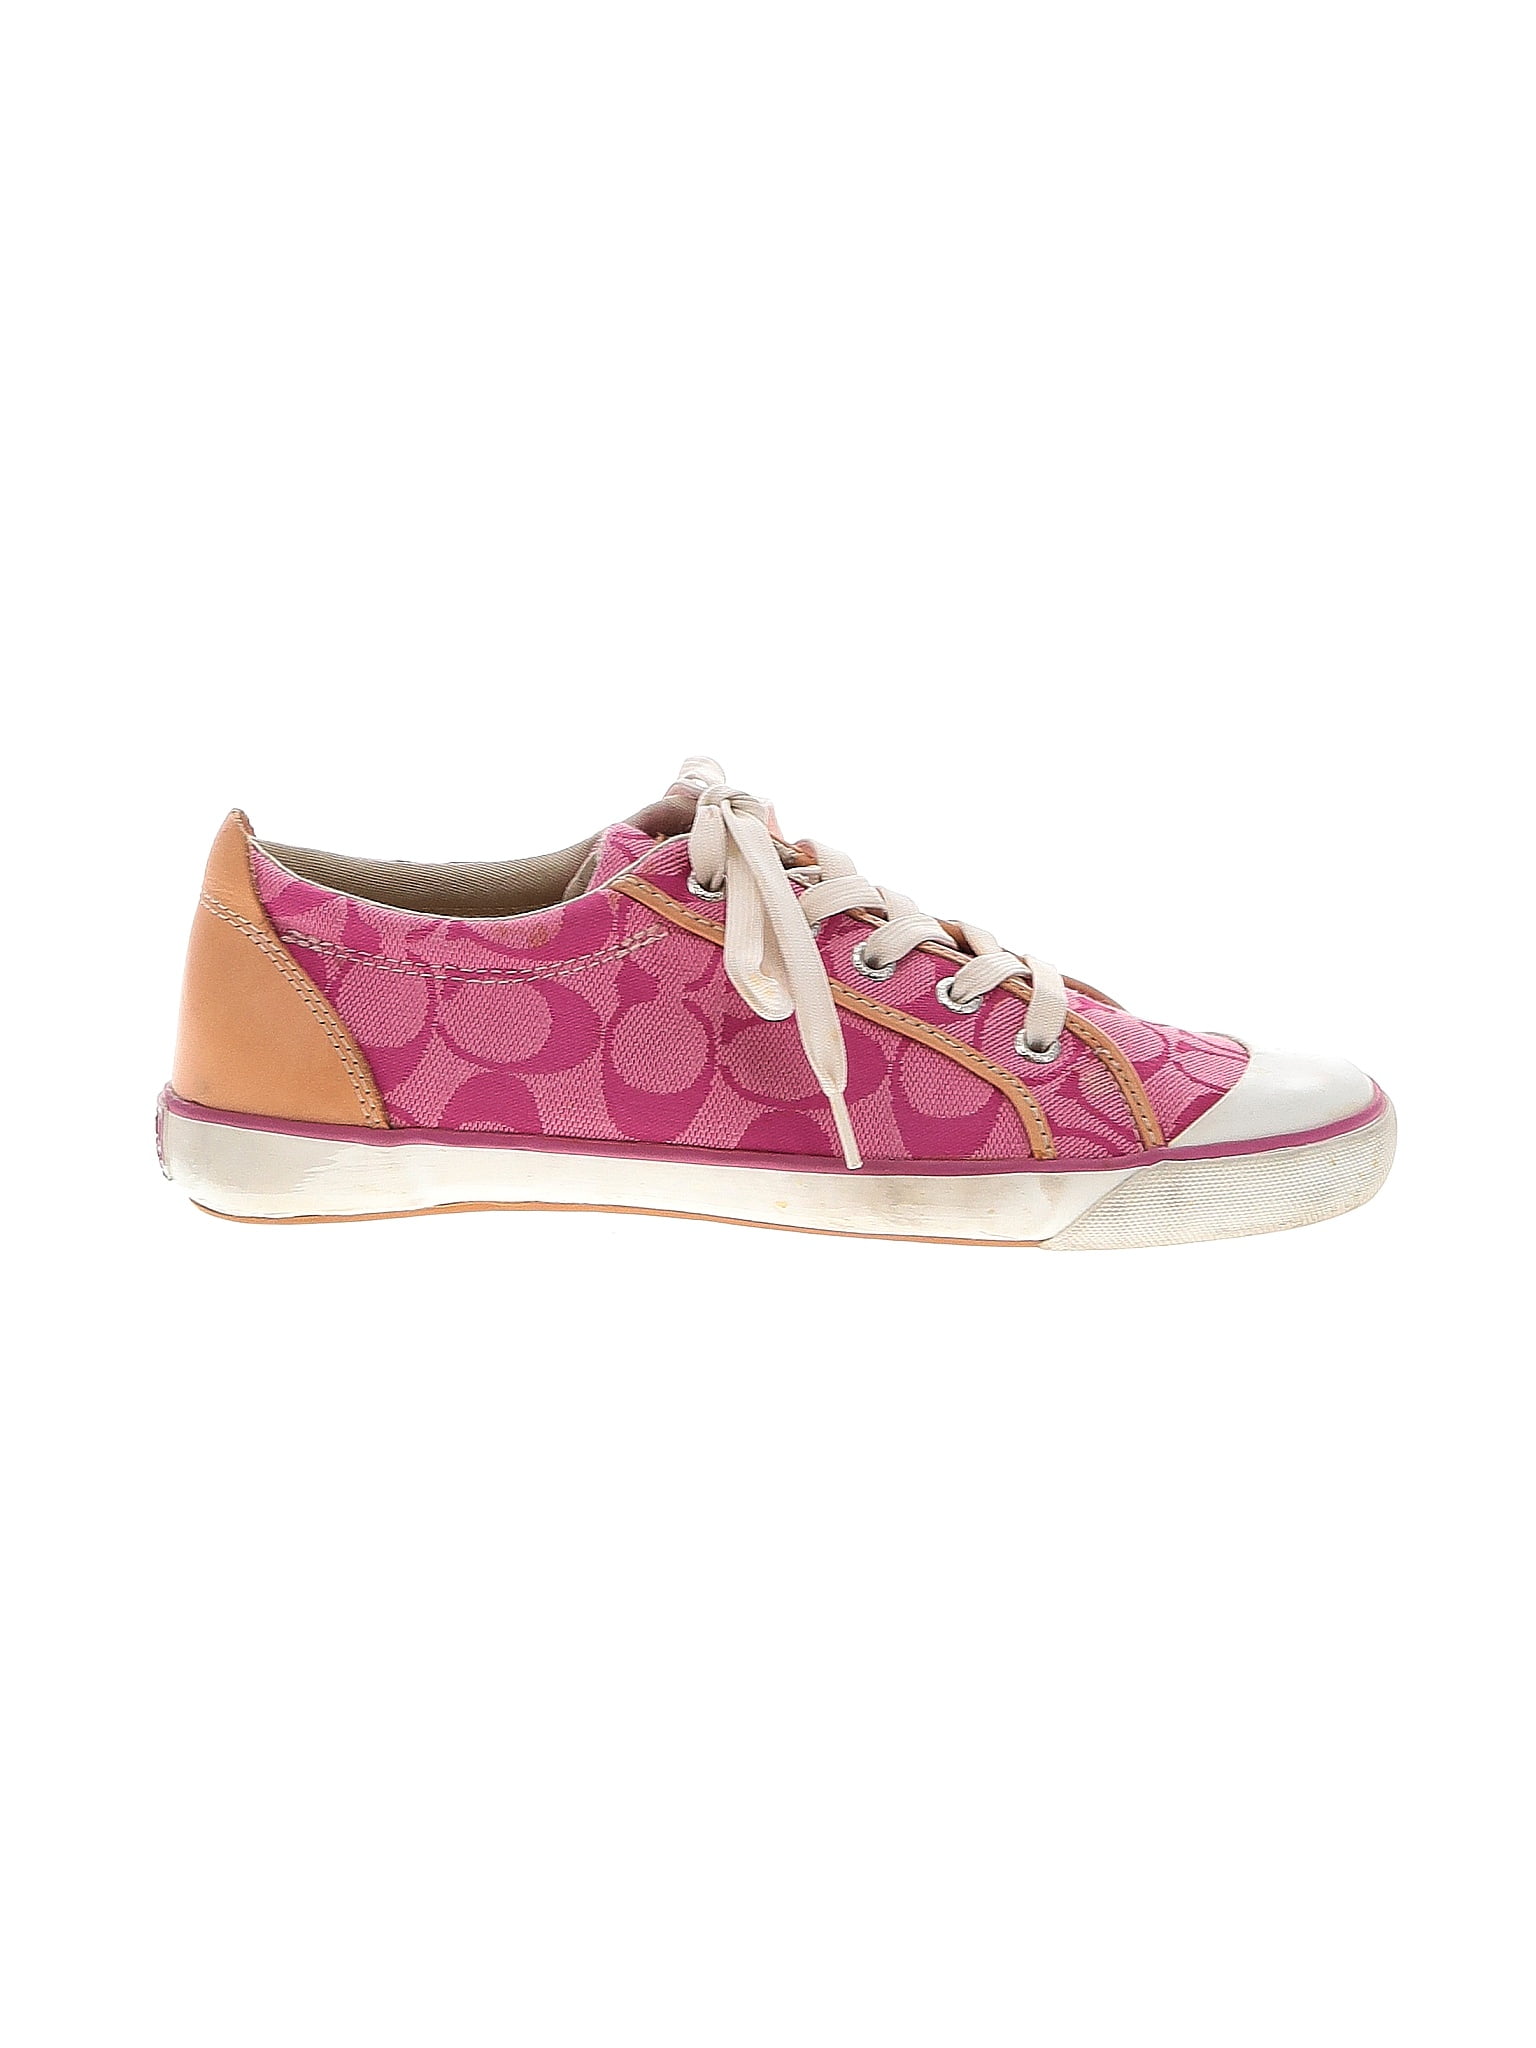 Coach Pink Sneakers Size 8 - 68% off | thredUP